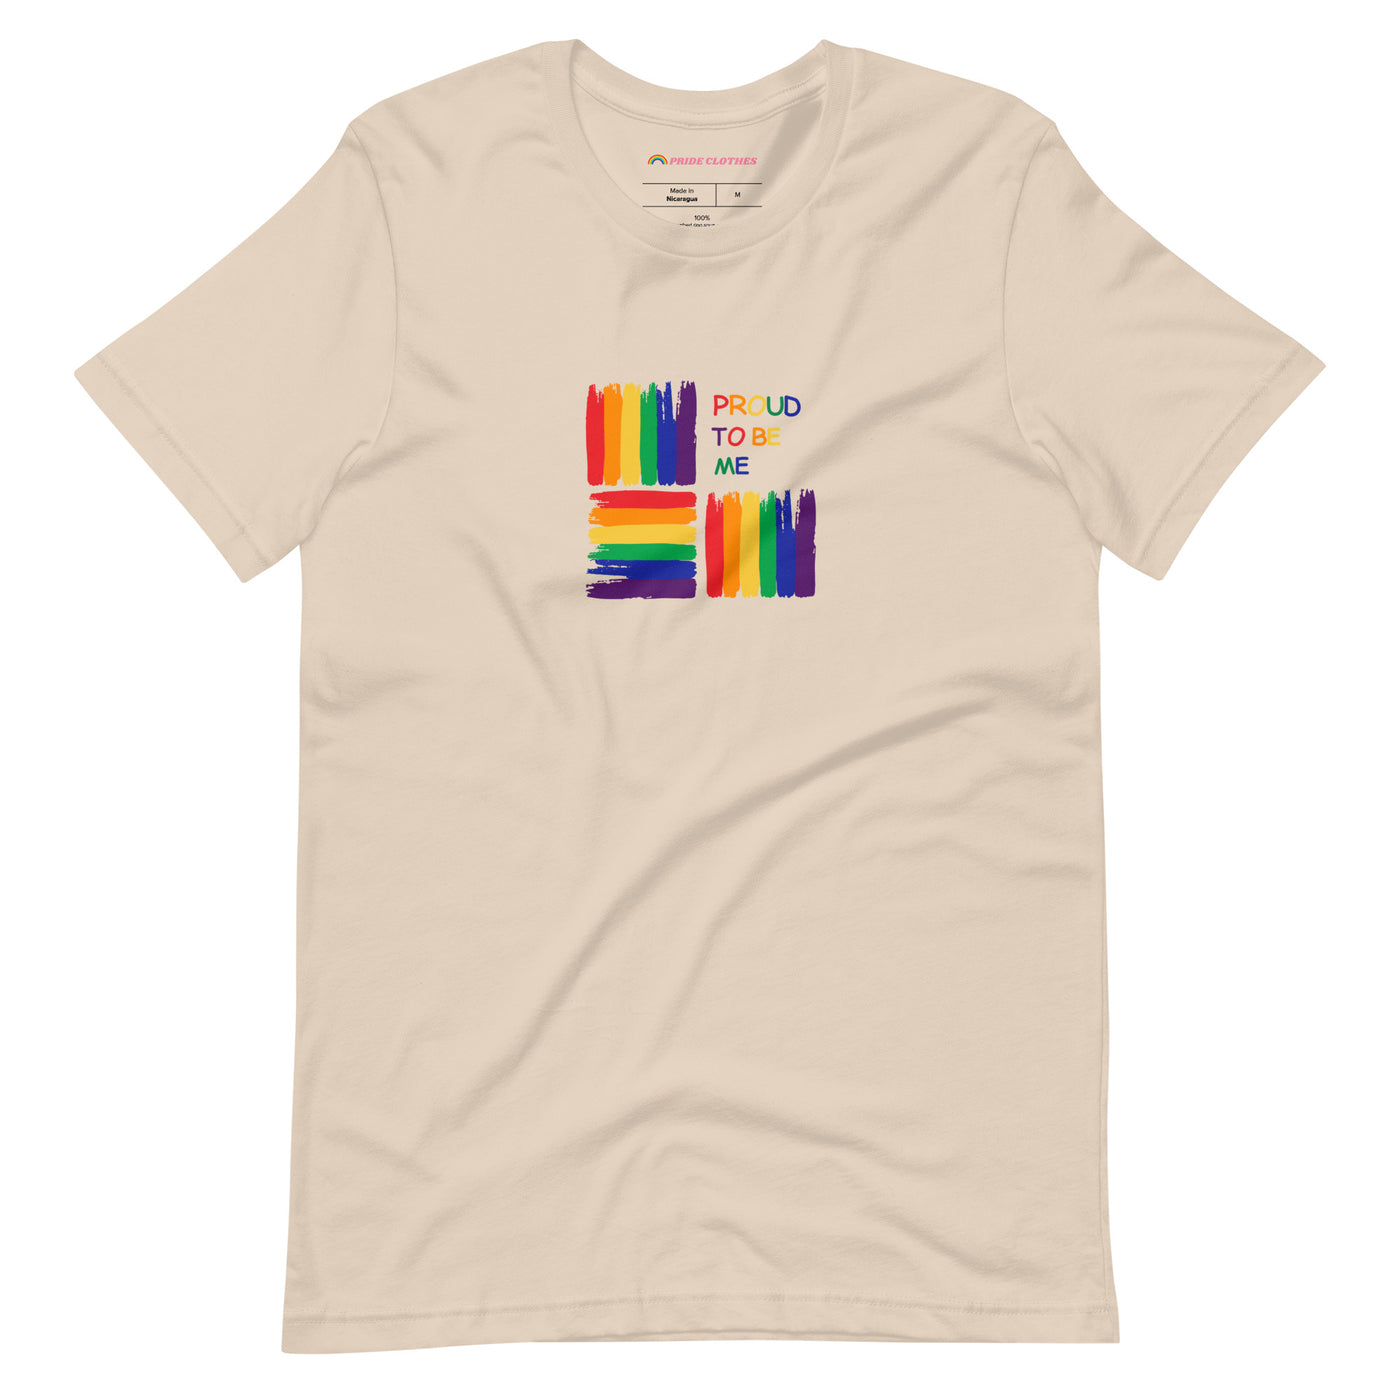 Pride Clothes - Around the Block Proud to Be Me Rainbow Pride T-Shirt - Soft Cream